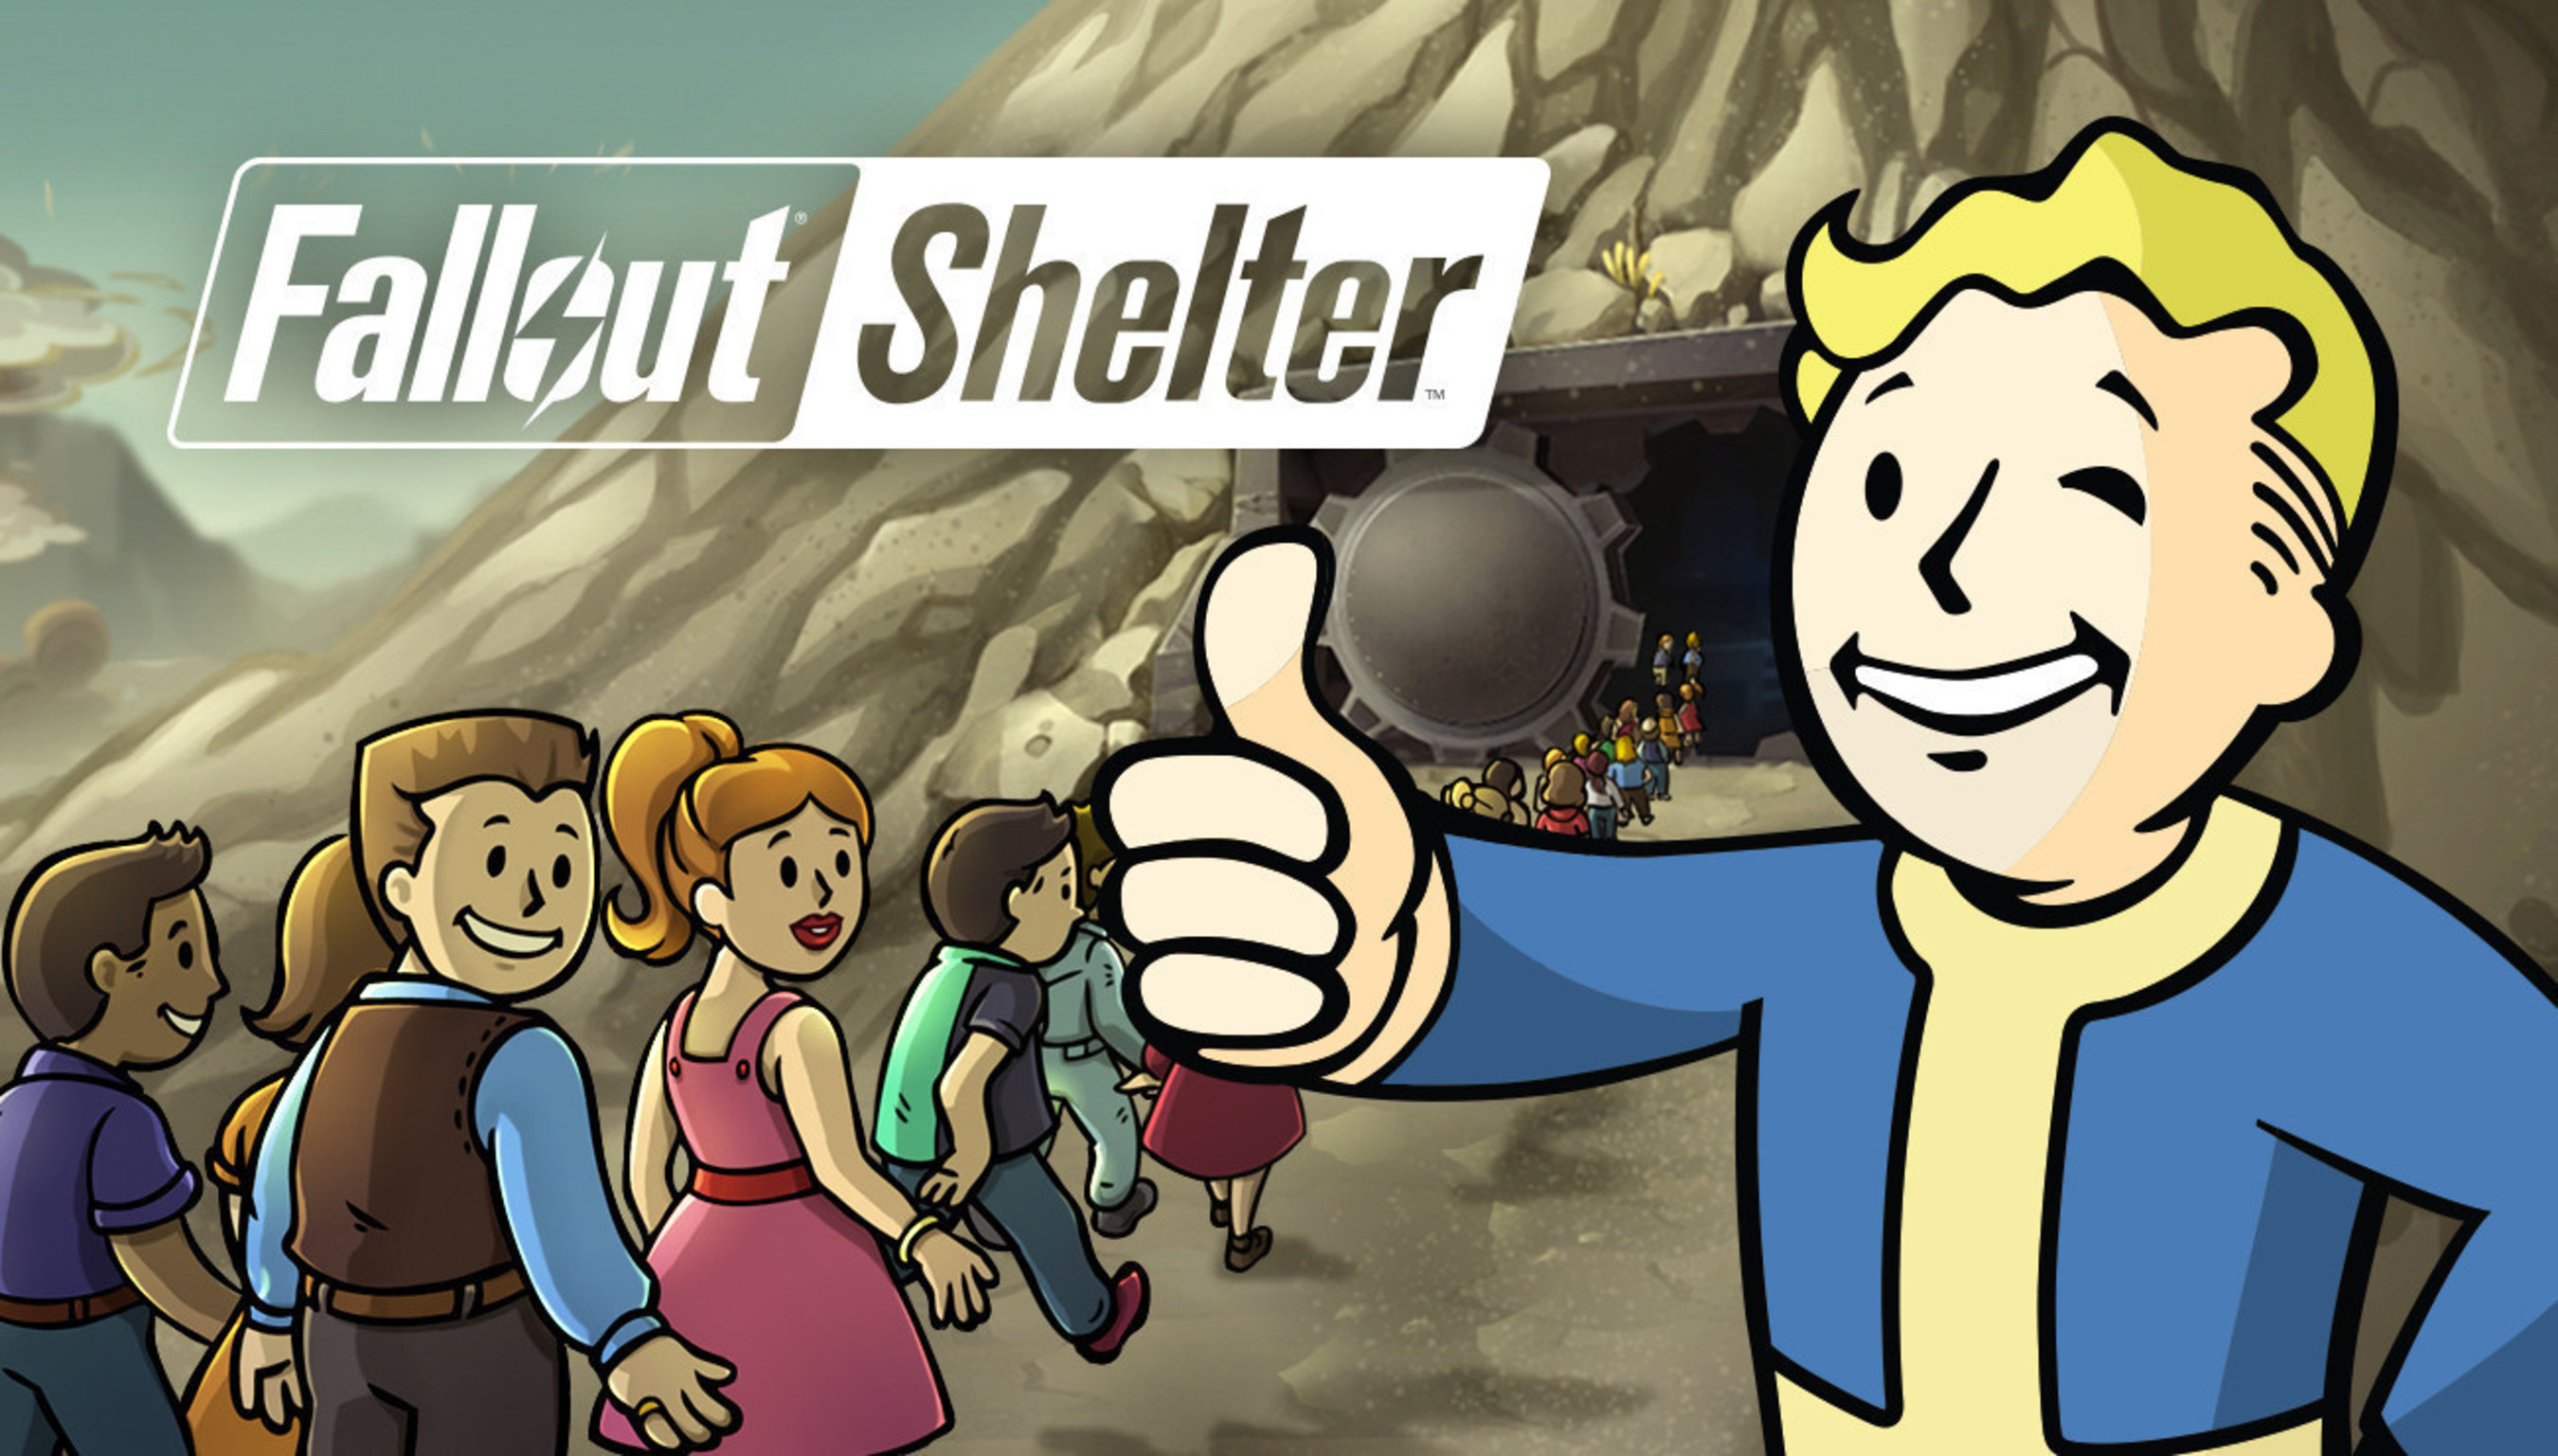 Fallout Shelter Achieves Massive Global Success; Debuts At #1 On App Store